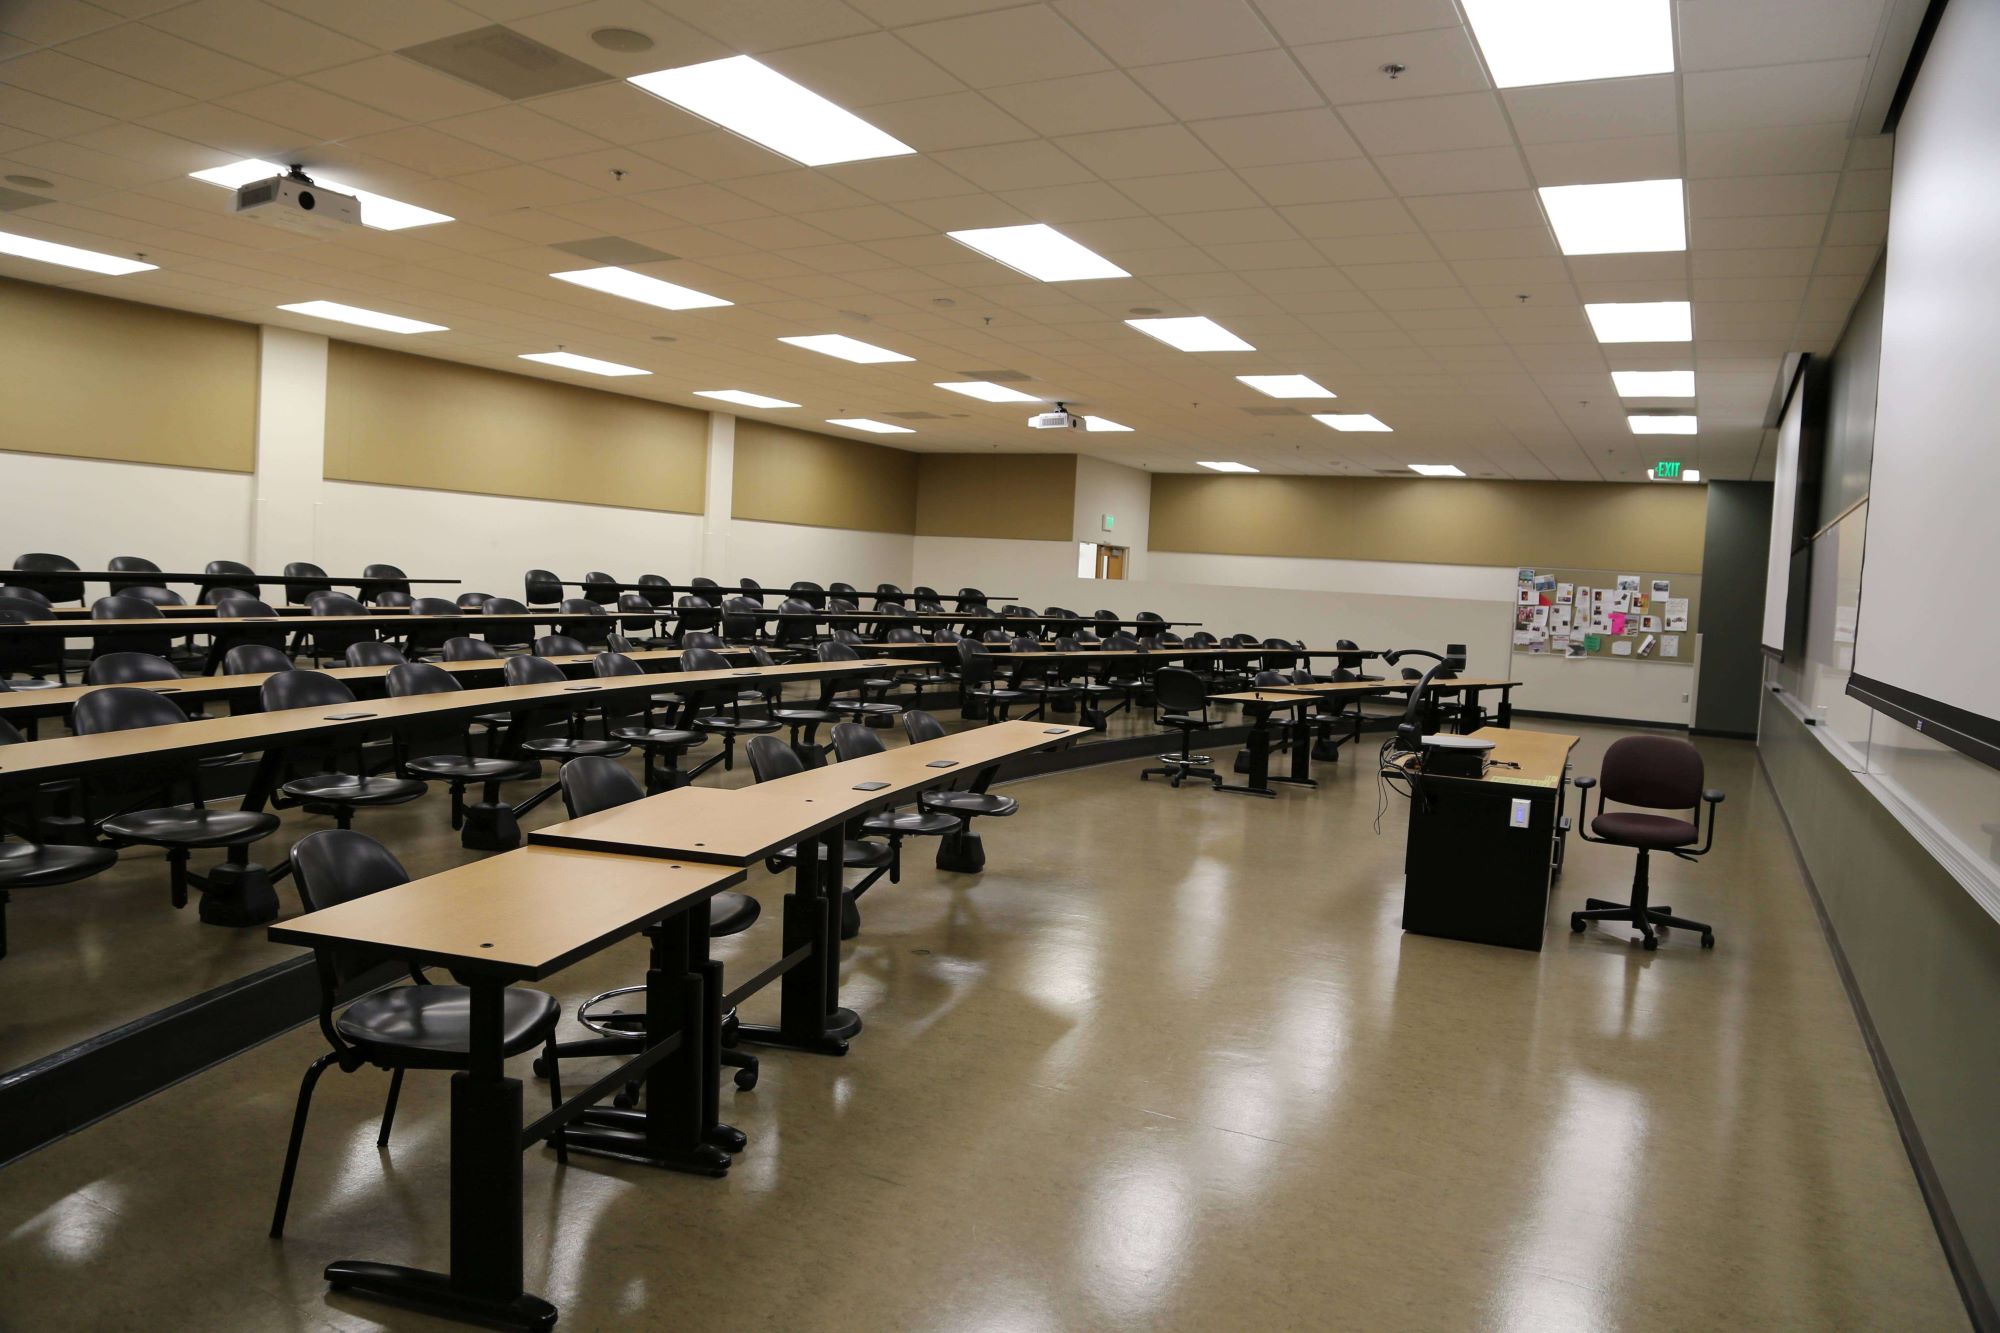 lecture hall with rows of desks and a large whiteboard with pulldown projector screens